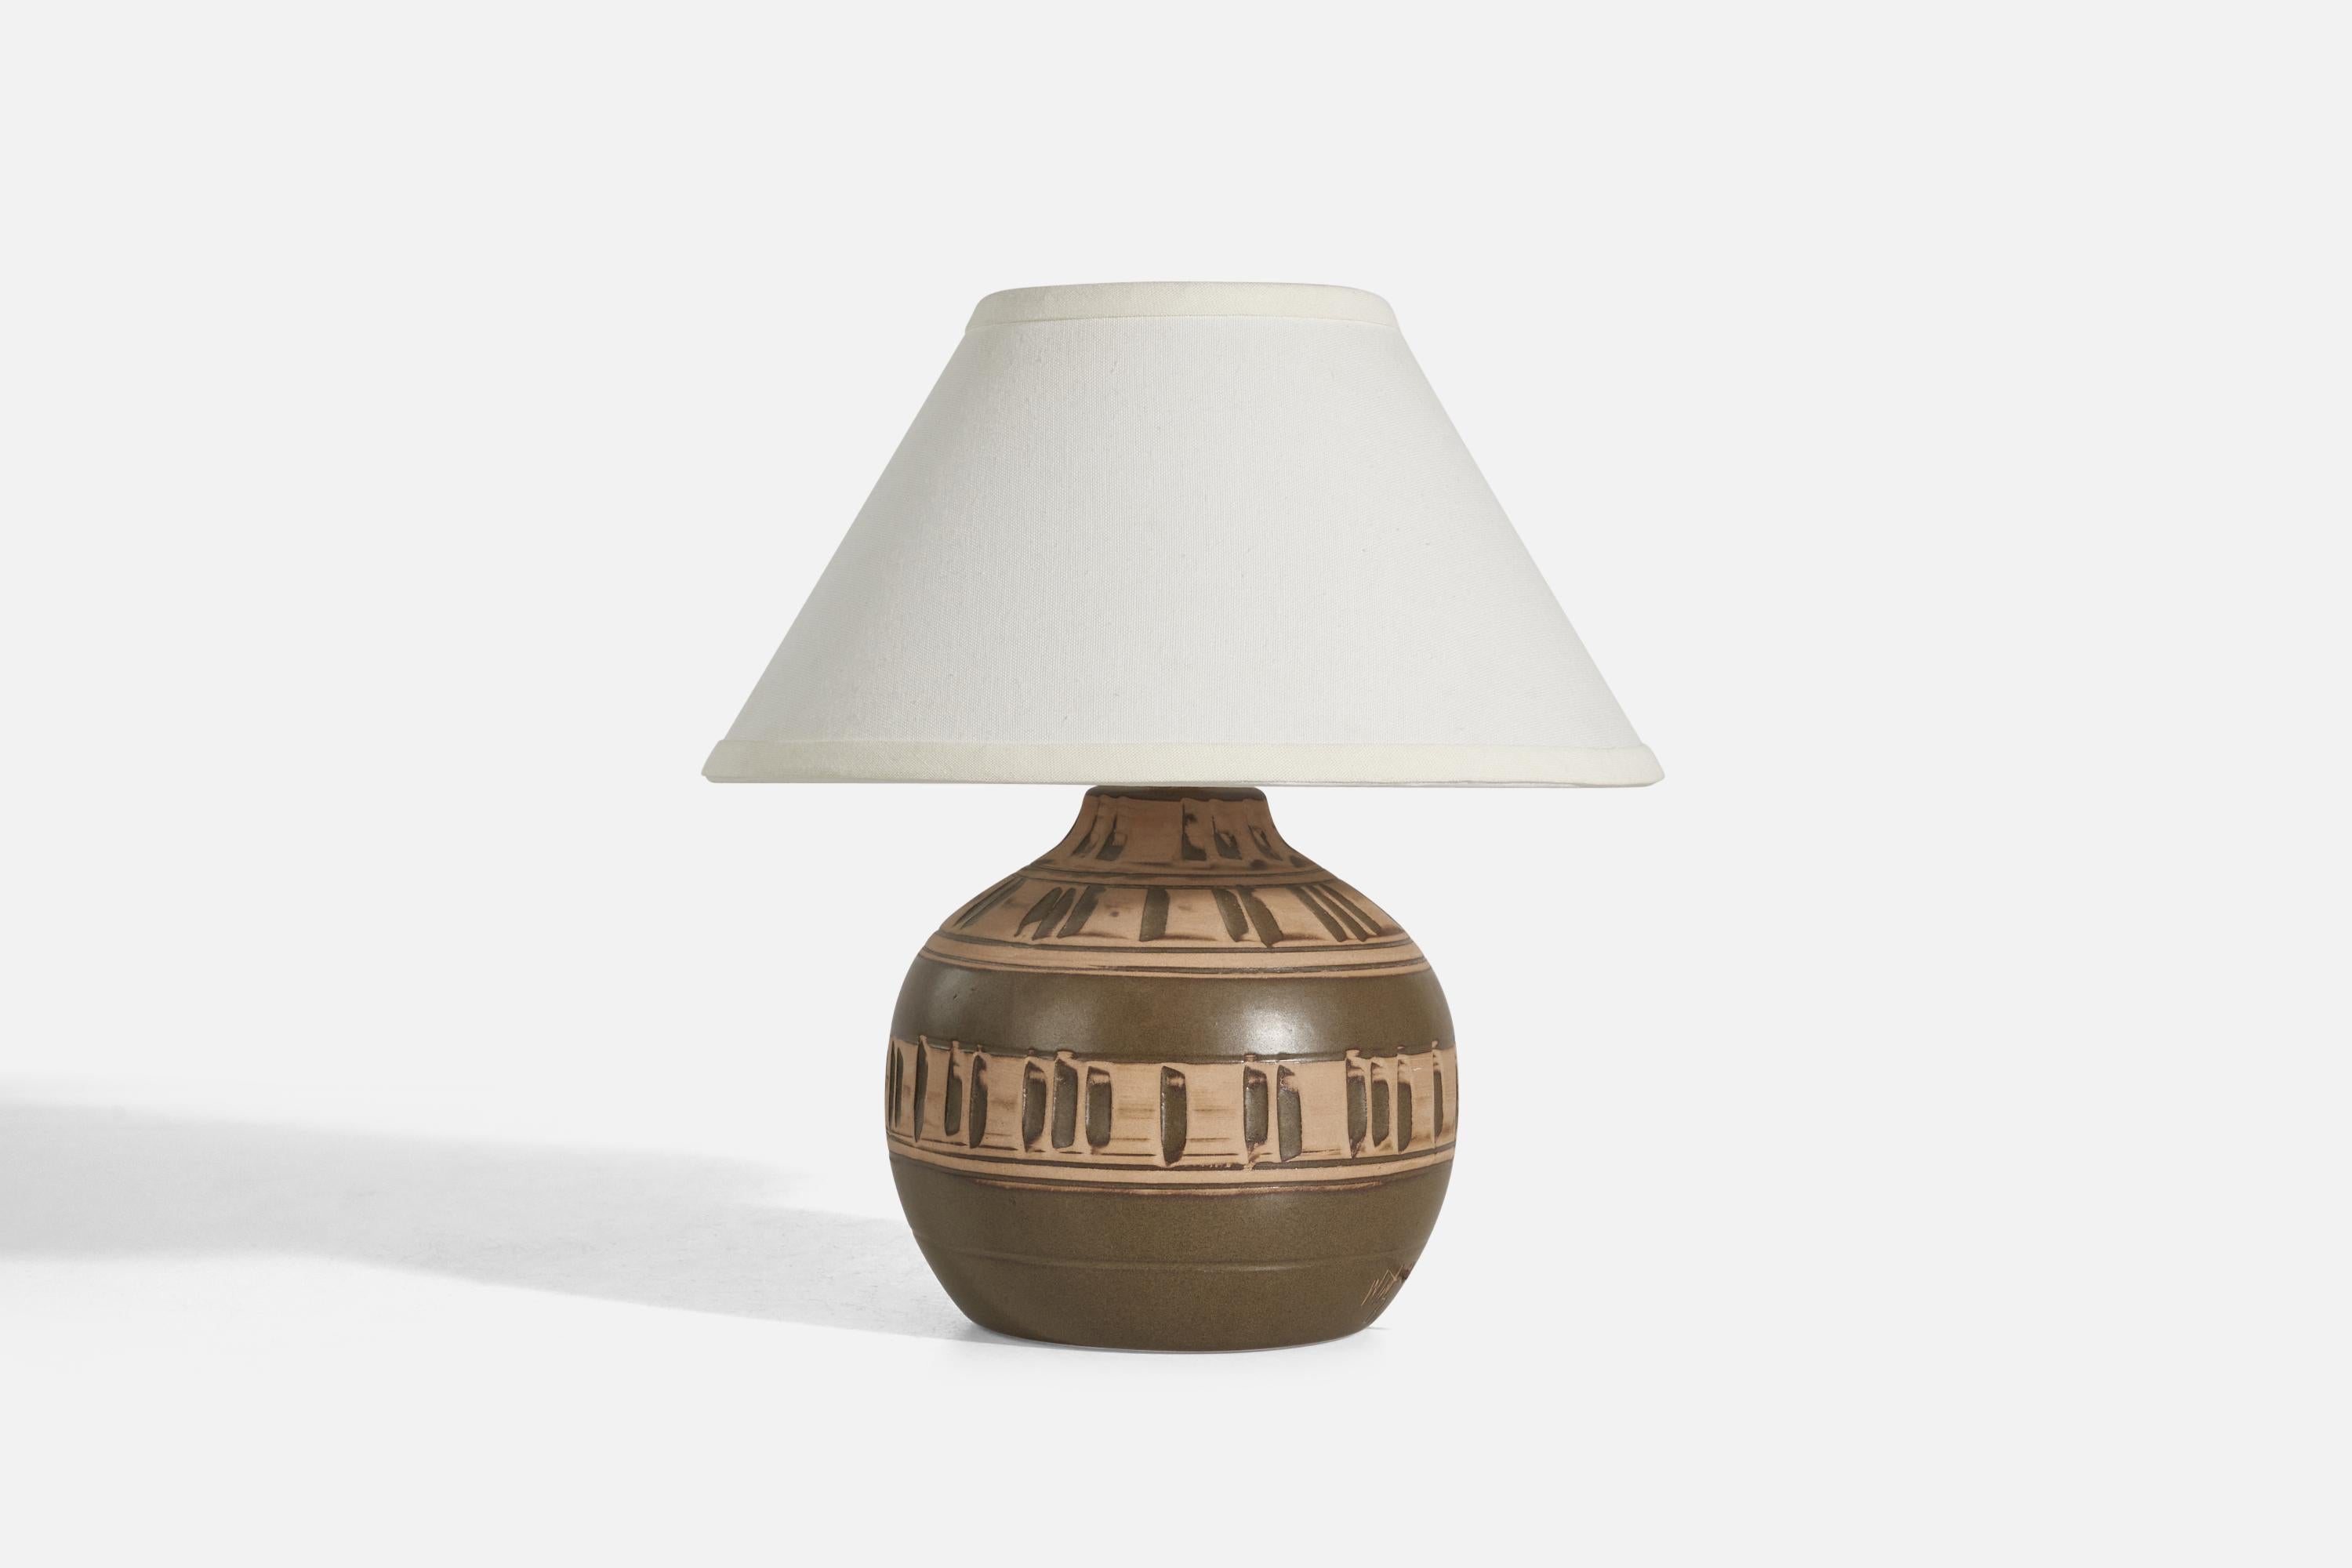 A brown table lamp designed by Jane & Gordon Martz and produced by Marshall Studios, Indianapolis, 1950s. 

Sold without Lampshade
Dimensions of Lamp (inches) : 9.75 x 7.25 x 7.25 (Height x Width x Depth)
Dimensions of Lampshade (inches) : 5 x 12 x